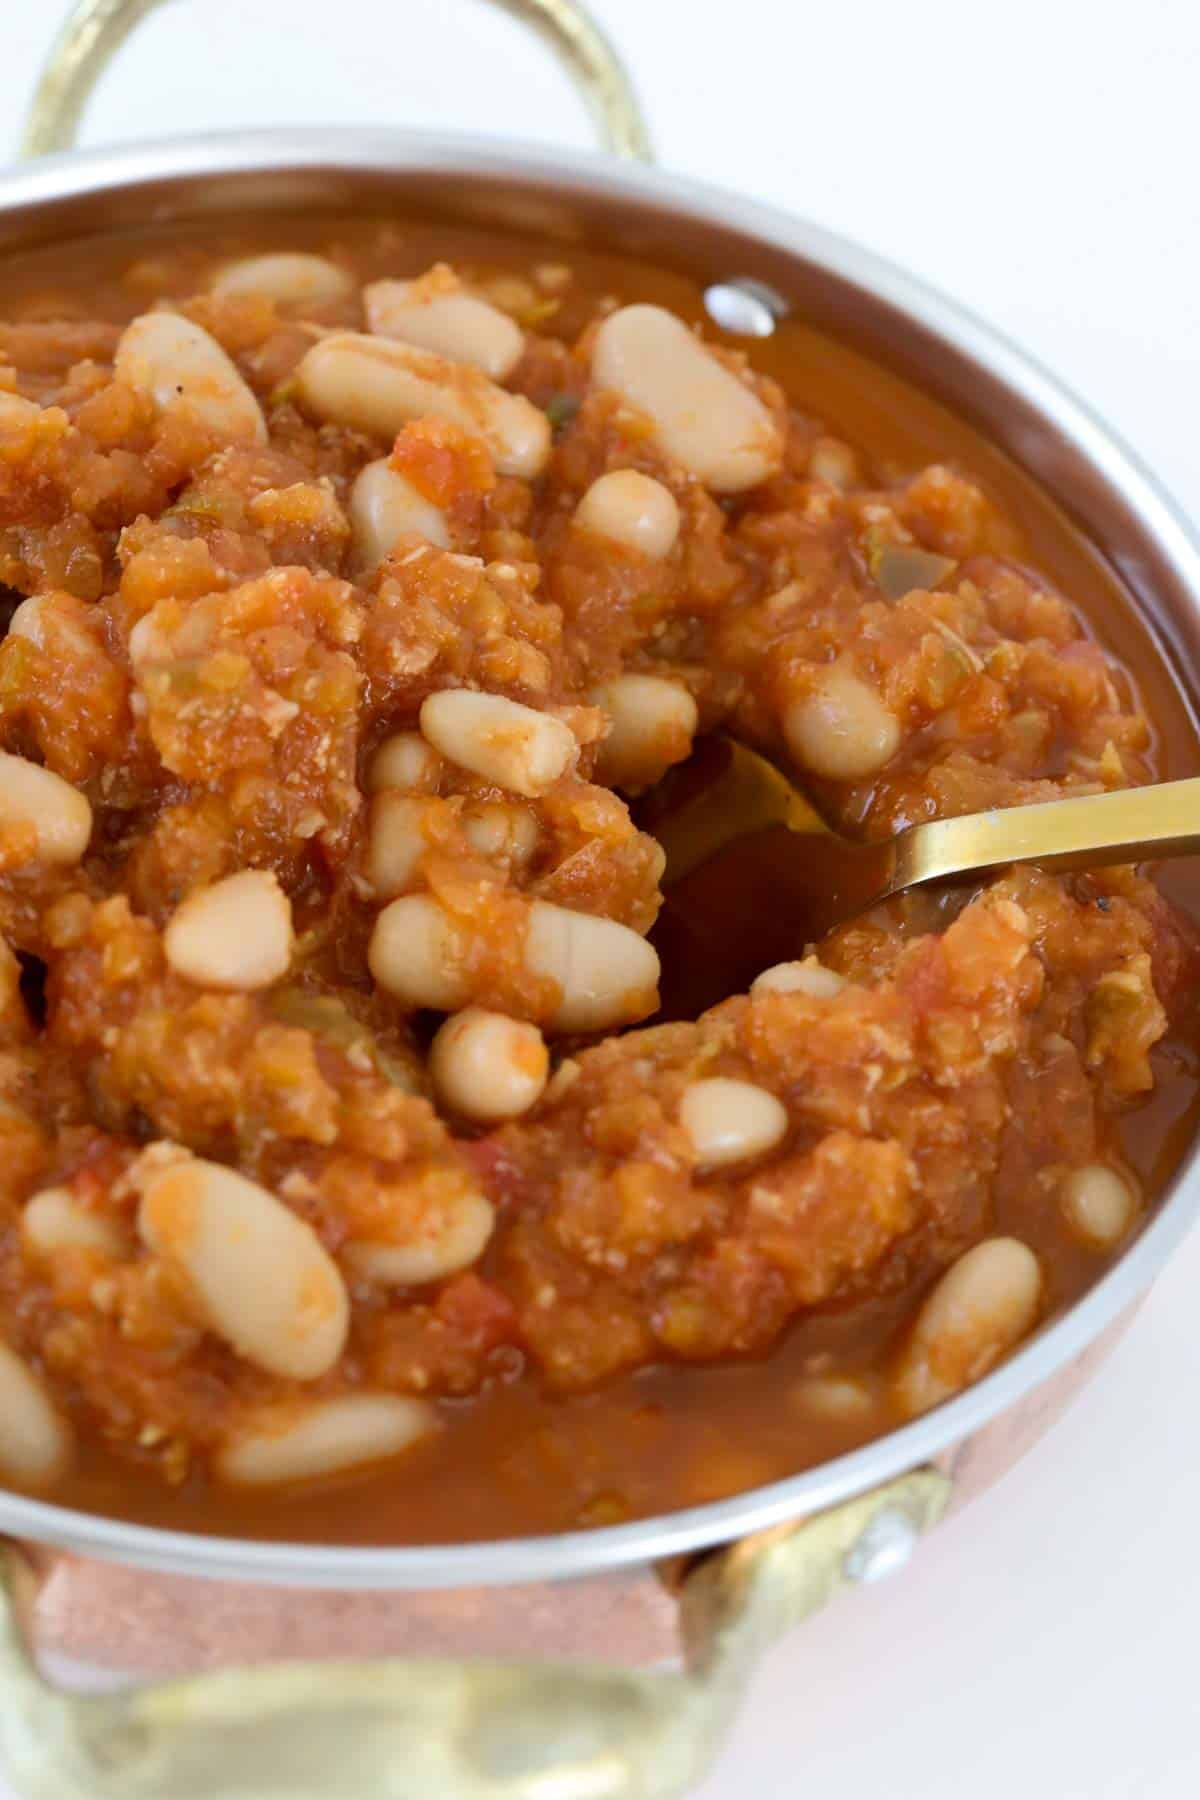 A bowl filled with homemade baked beans.